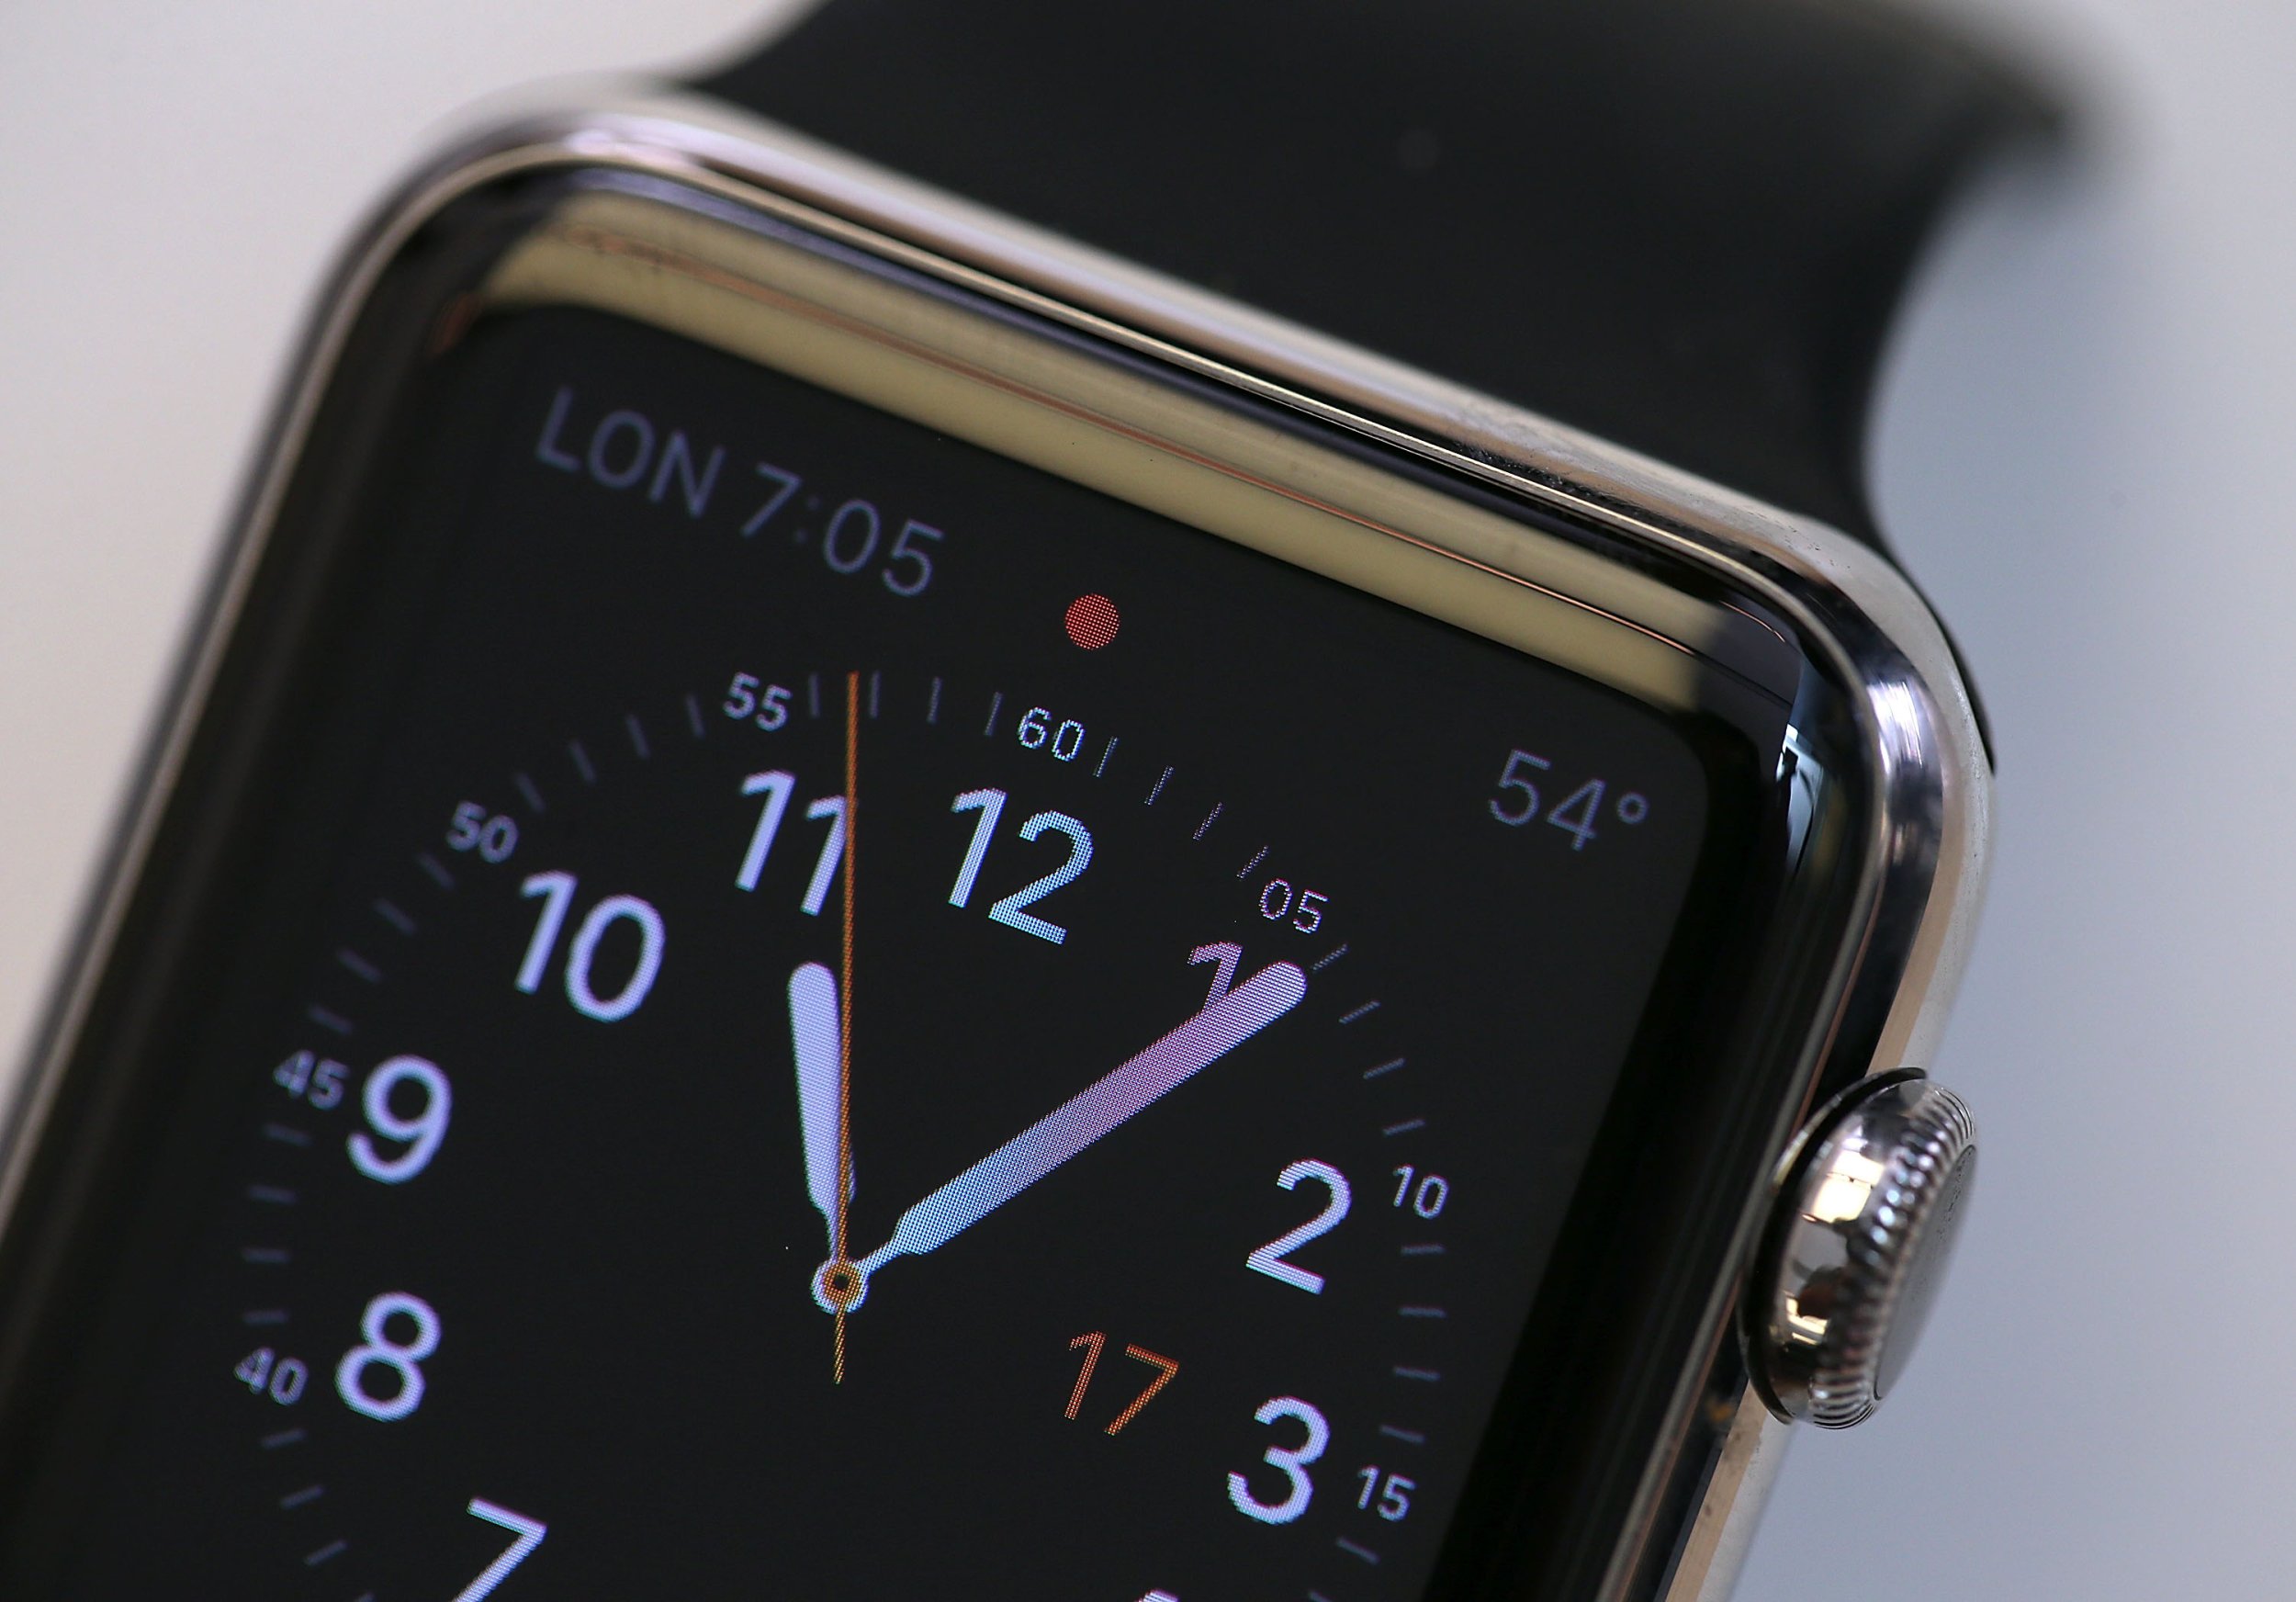 Apple Watch 2 Release Date Rumors Apple Inc Planning March 2016 Event For Smartwatch 4 Inch